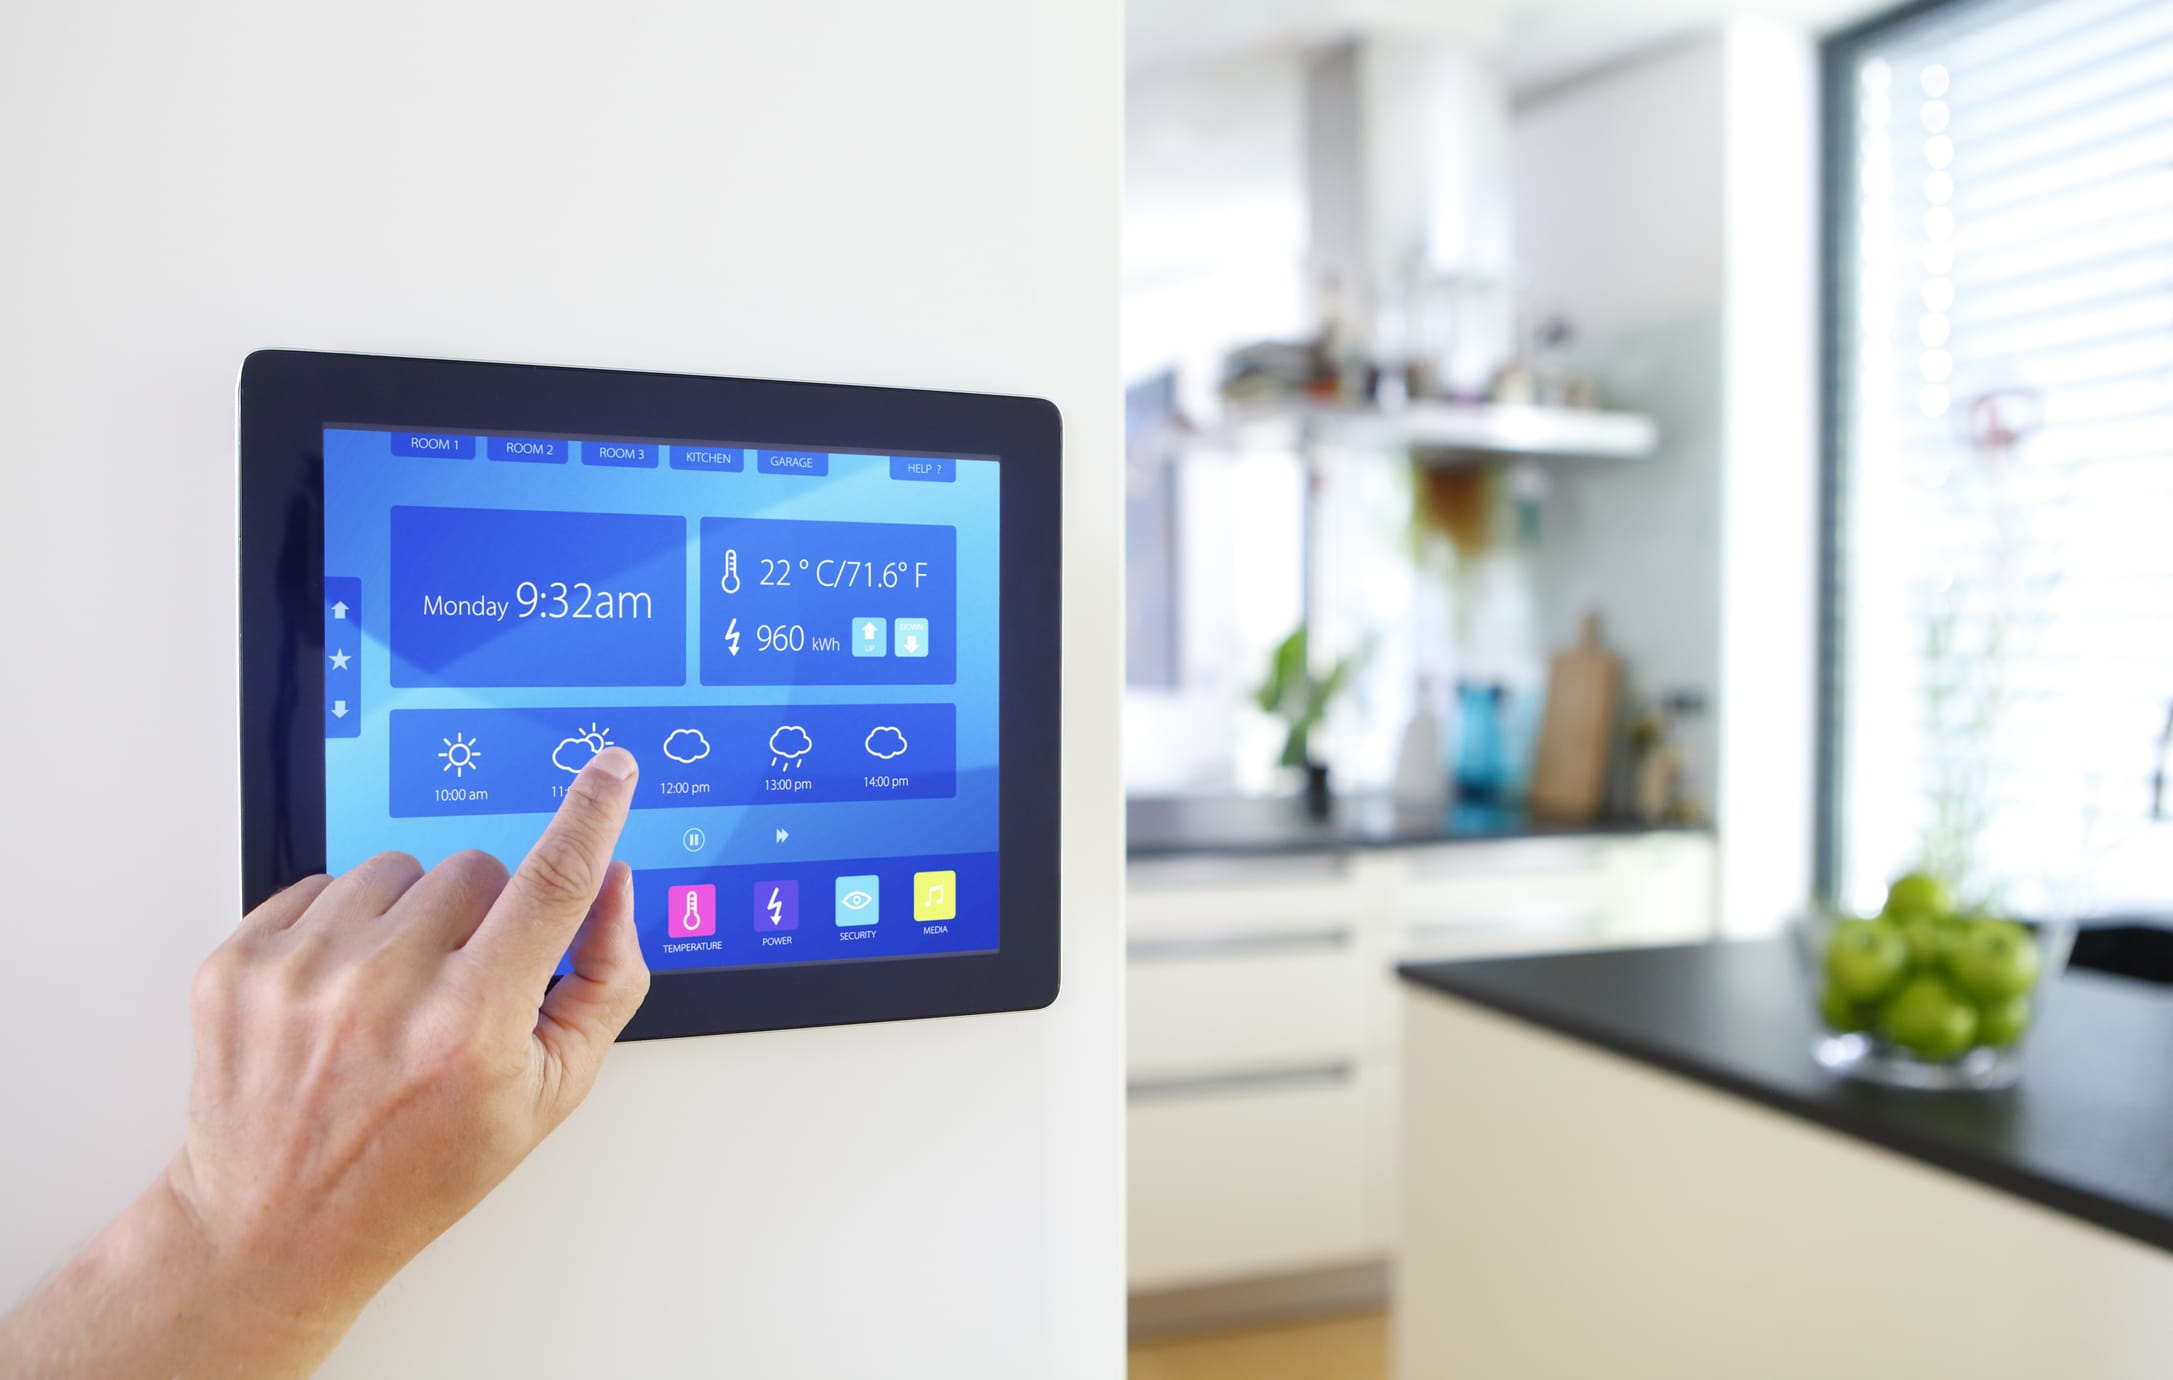 Home Automation Tampa Fl